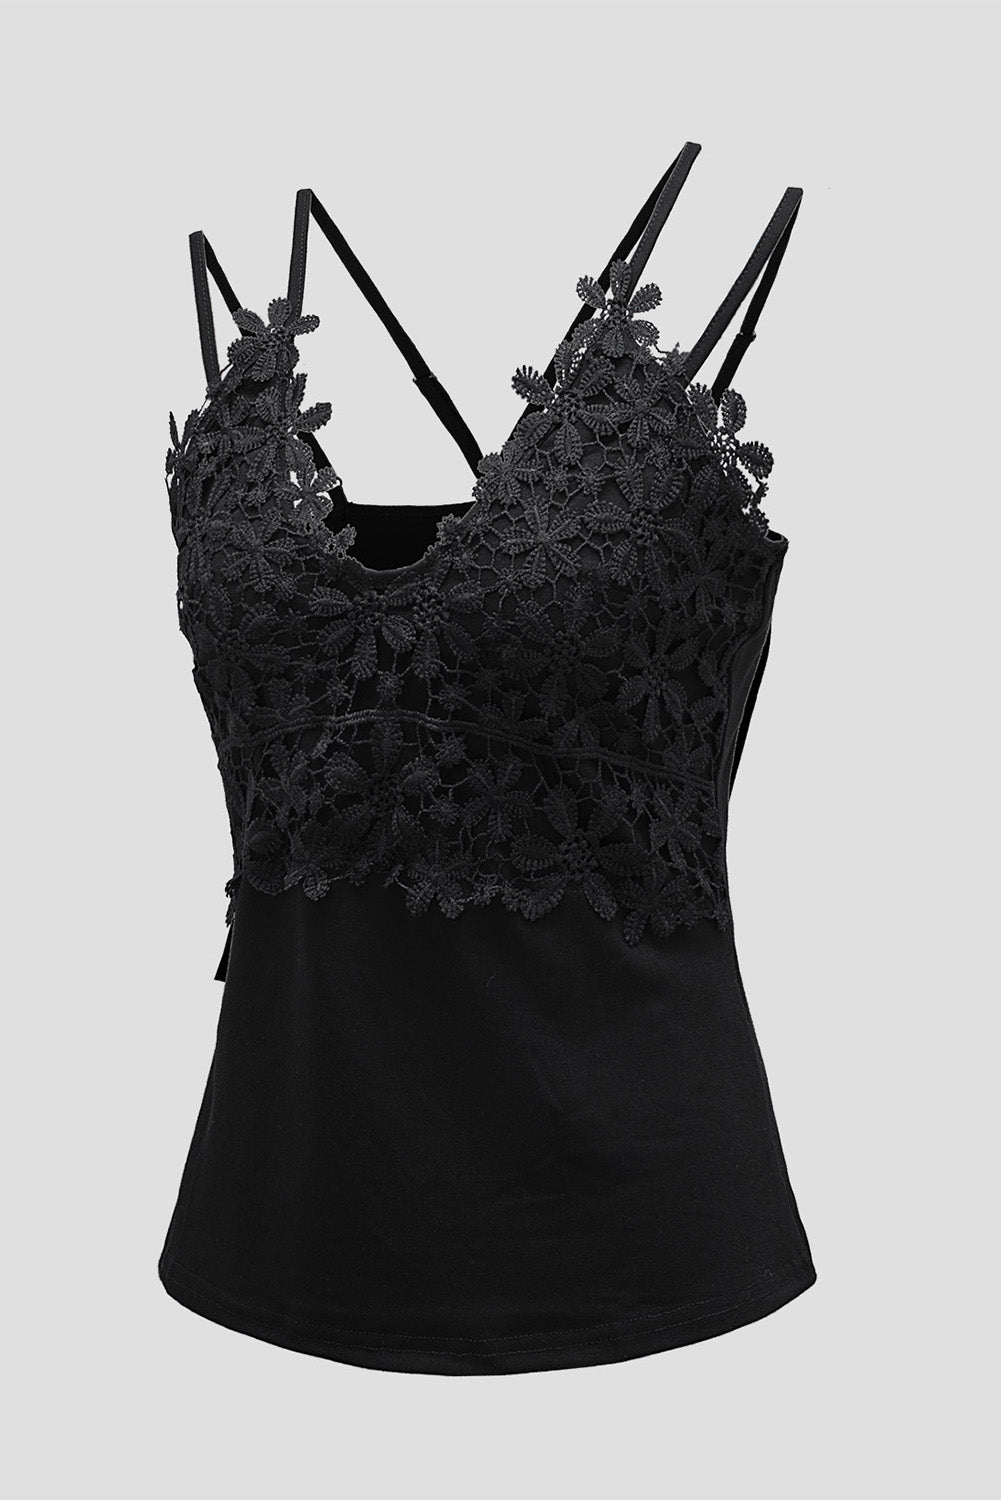 Black Lace Overlay Strappy Hollow-out Tank Top Tank Tops JT's Designer Fashion